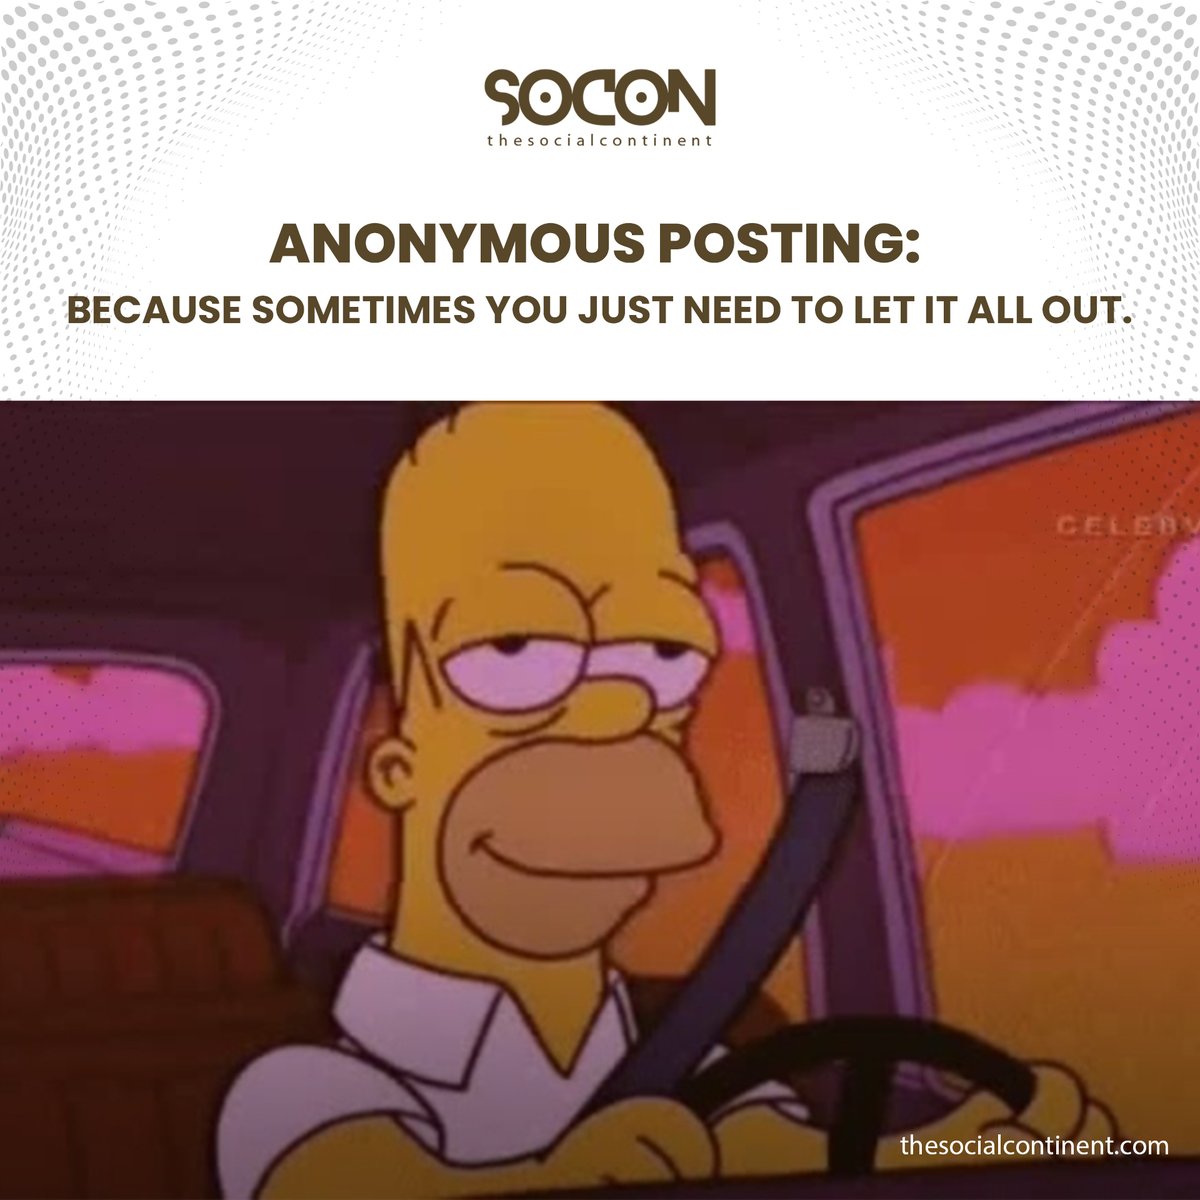 It's a kind of therapy 😌

#memes #anonymousmemes #anonymity #funnymemes #memer #fun #instamemes #instamere #instafun #instadaily #instamood #ınstagood #funmeme #sarcasm #sarcastic #humor #dankmeme